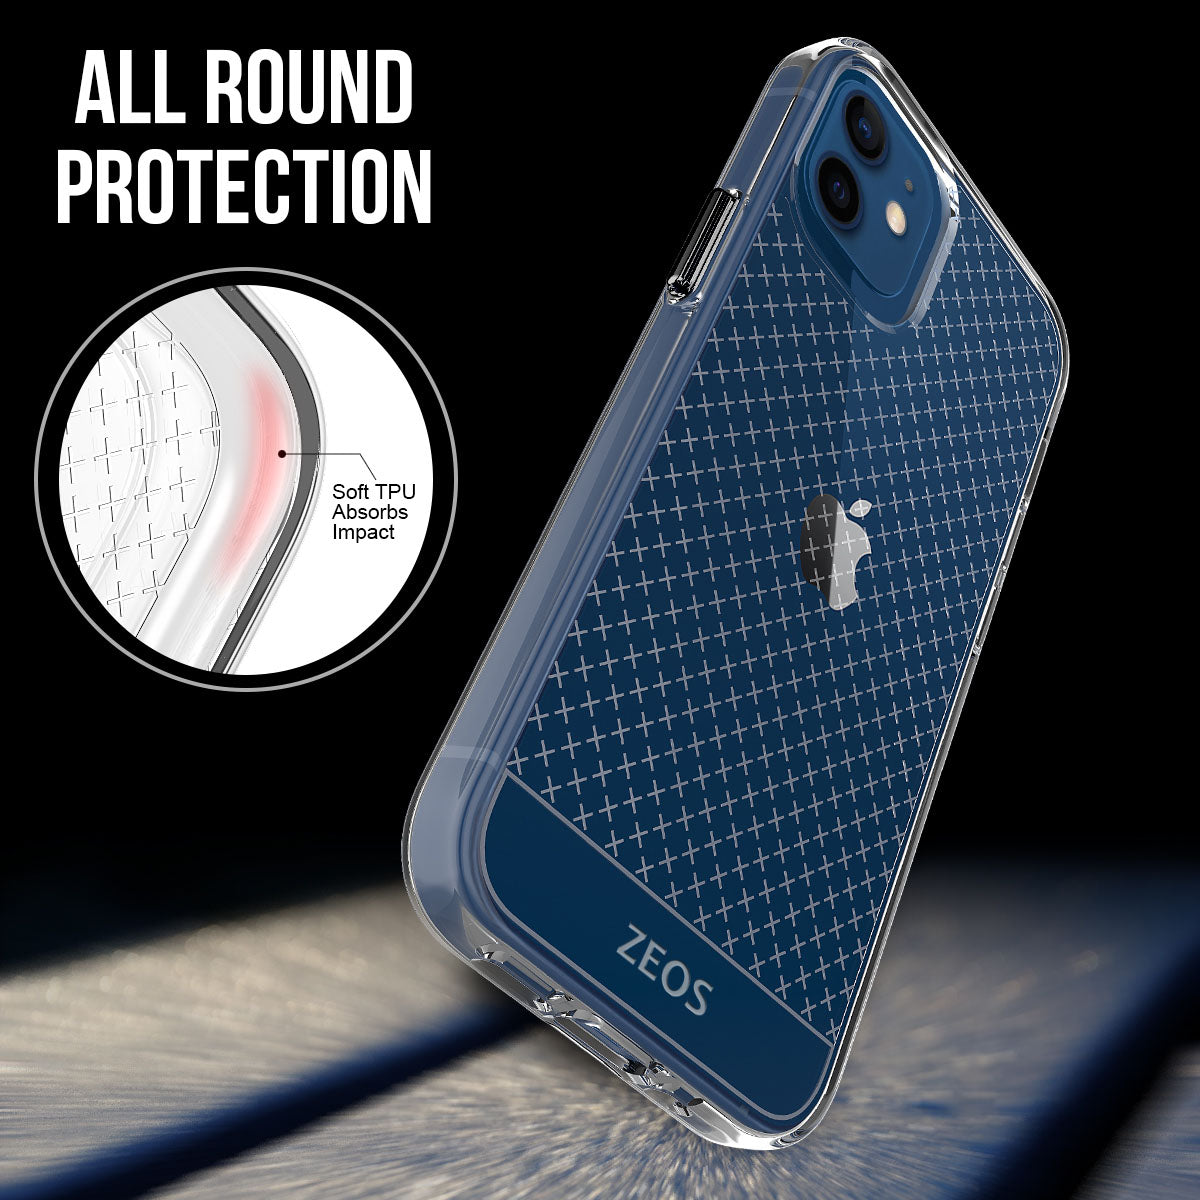 ZEOS KLARITY-X Clear CASE for iPhone 12 Mini